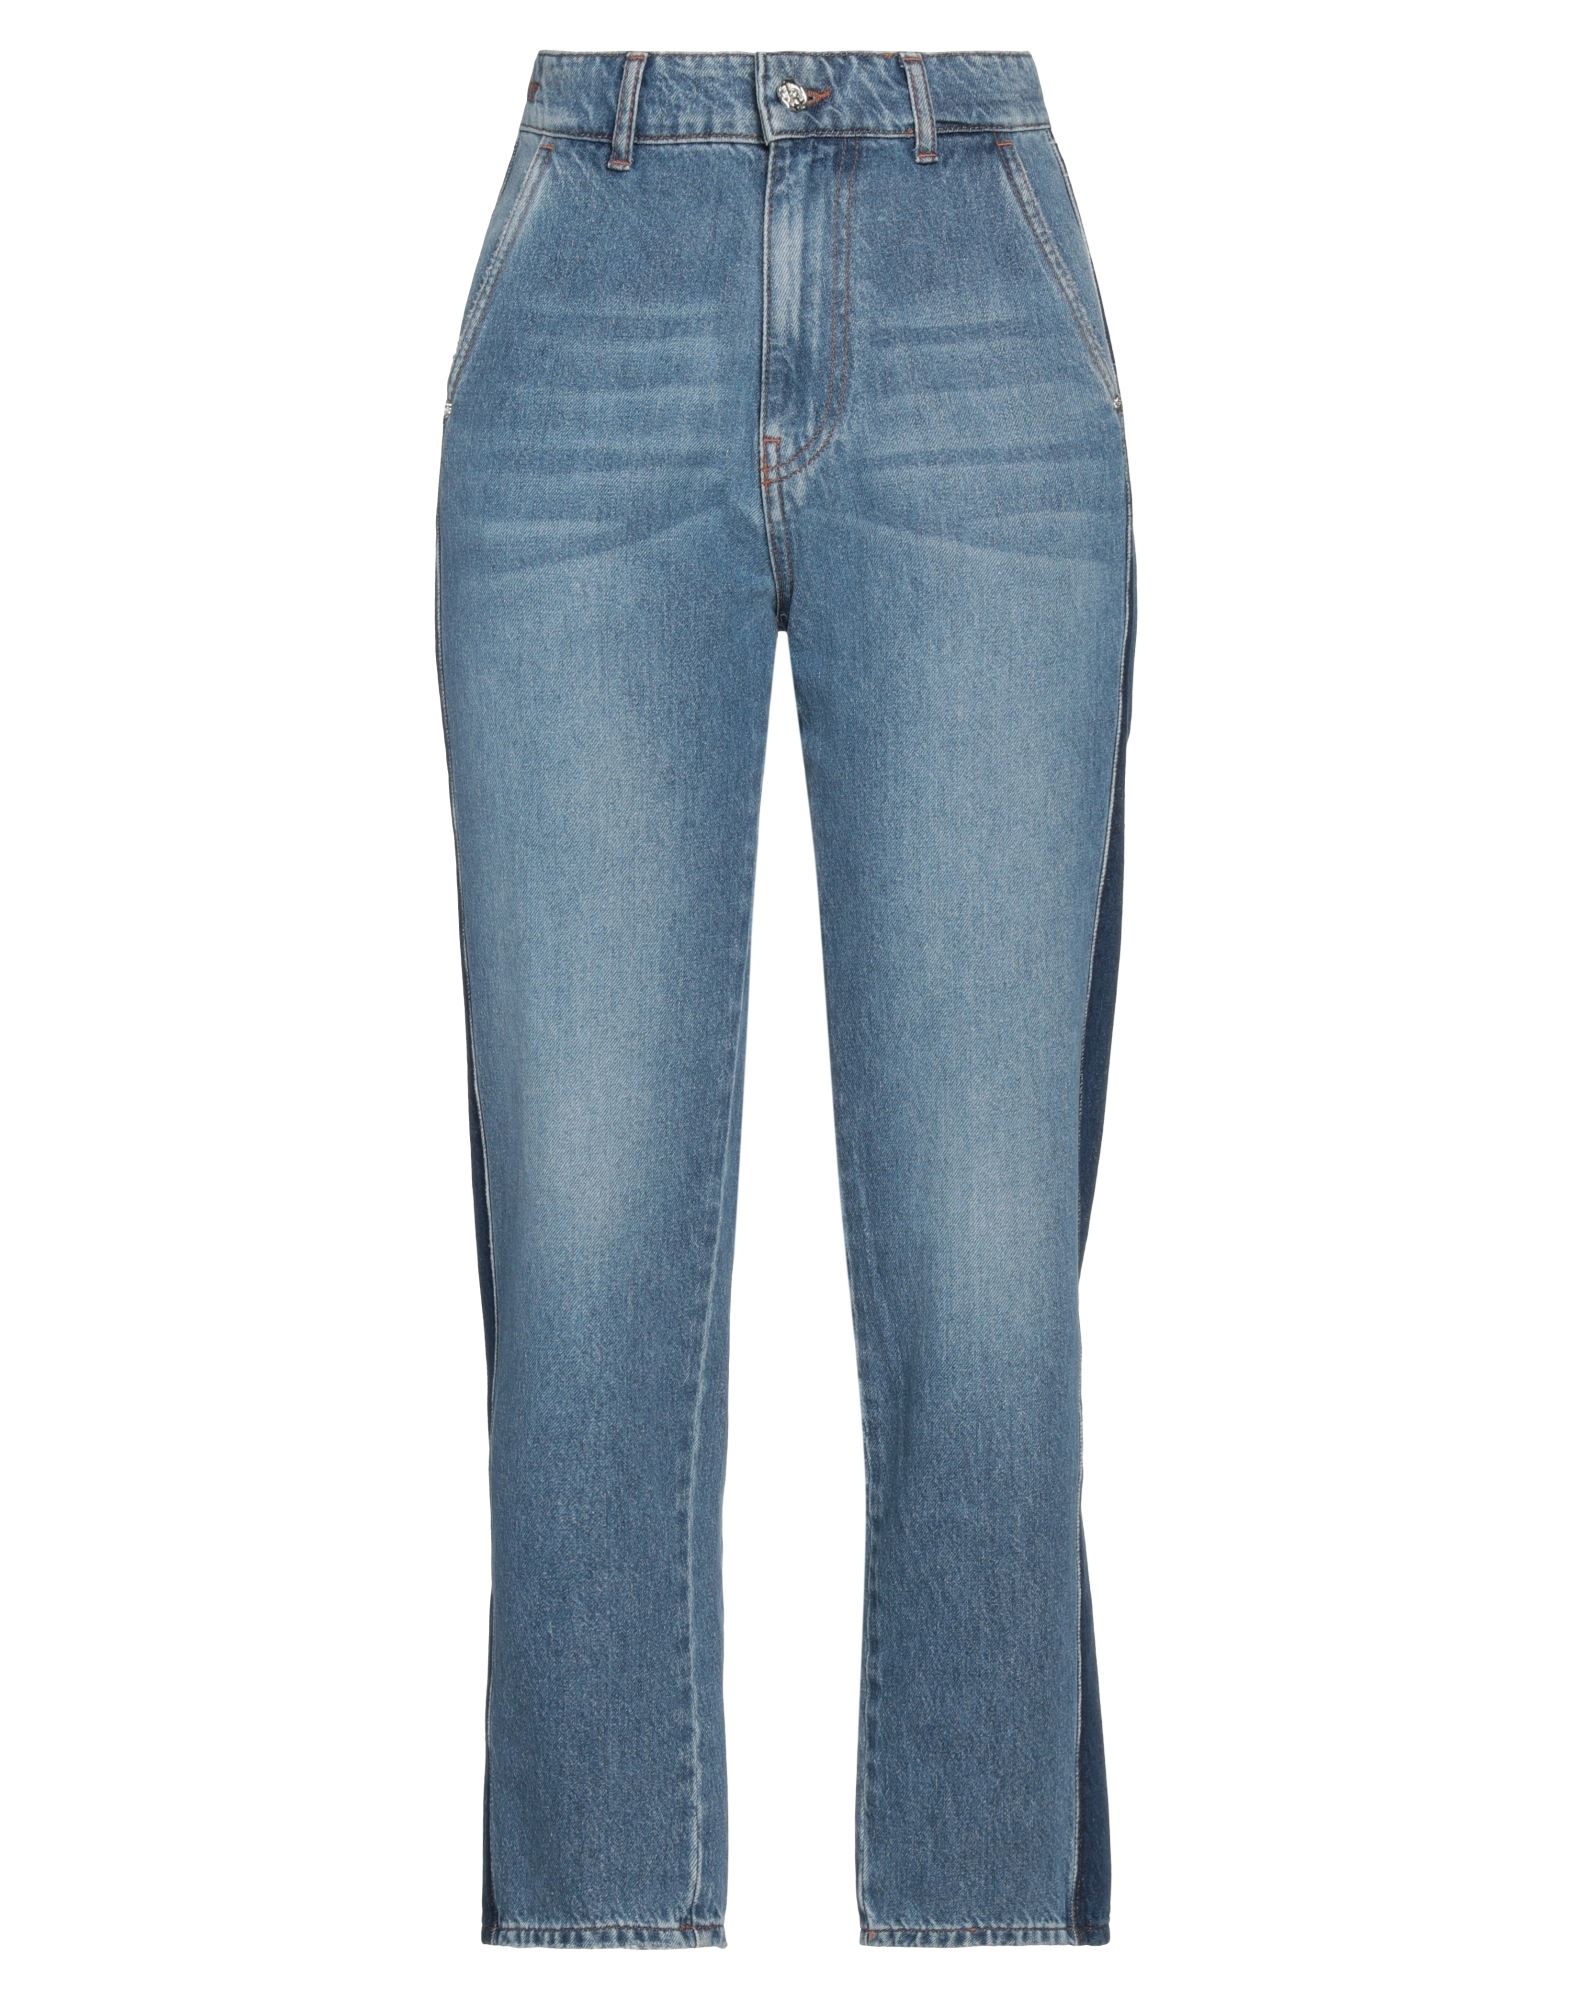 Rue 8isquit Jeans In Blue